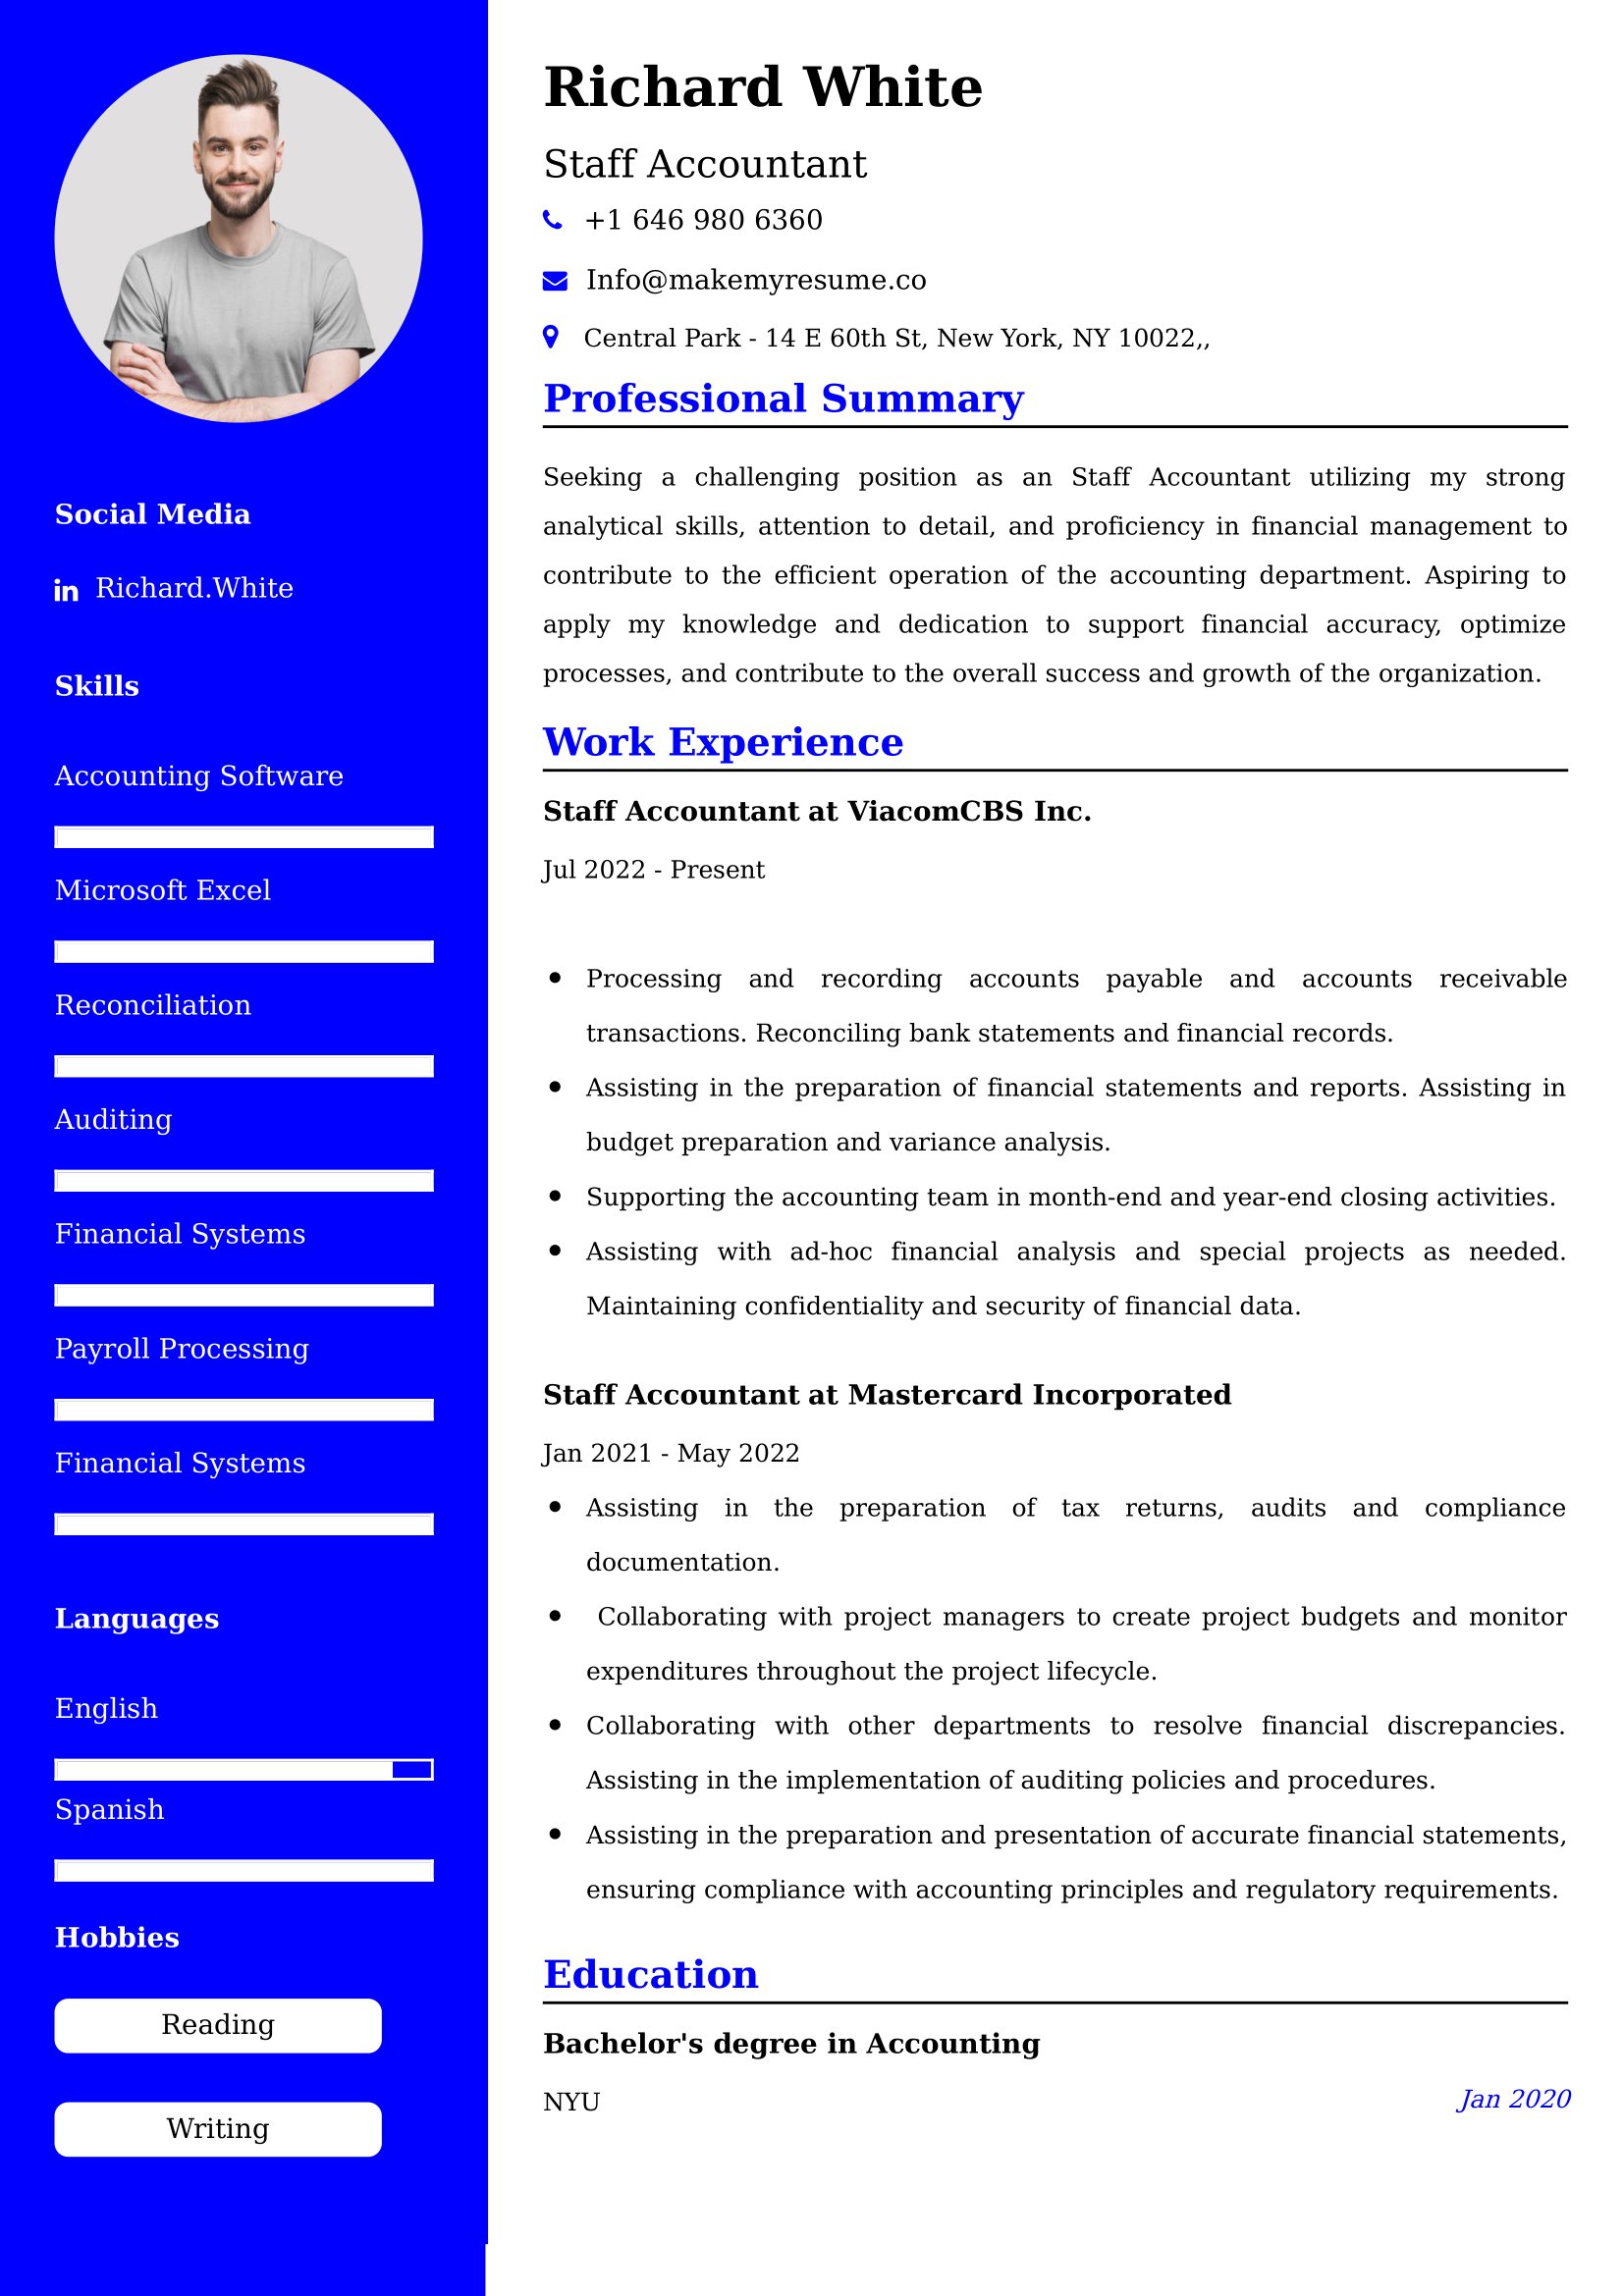 Staff Accountant Resume Examples for UK Jobs - Tips and Guide